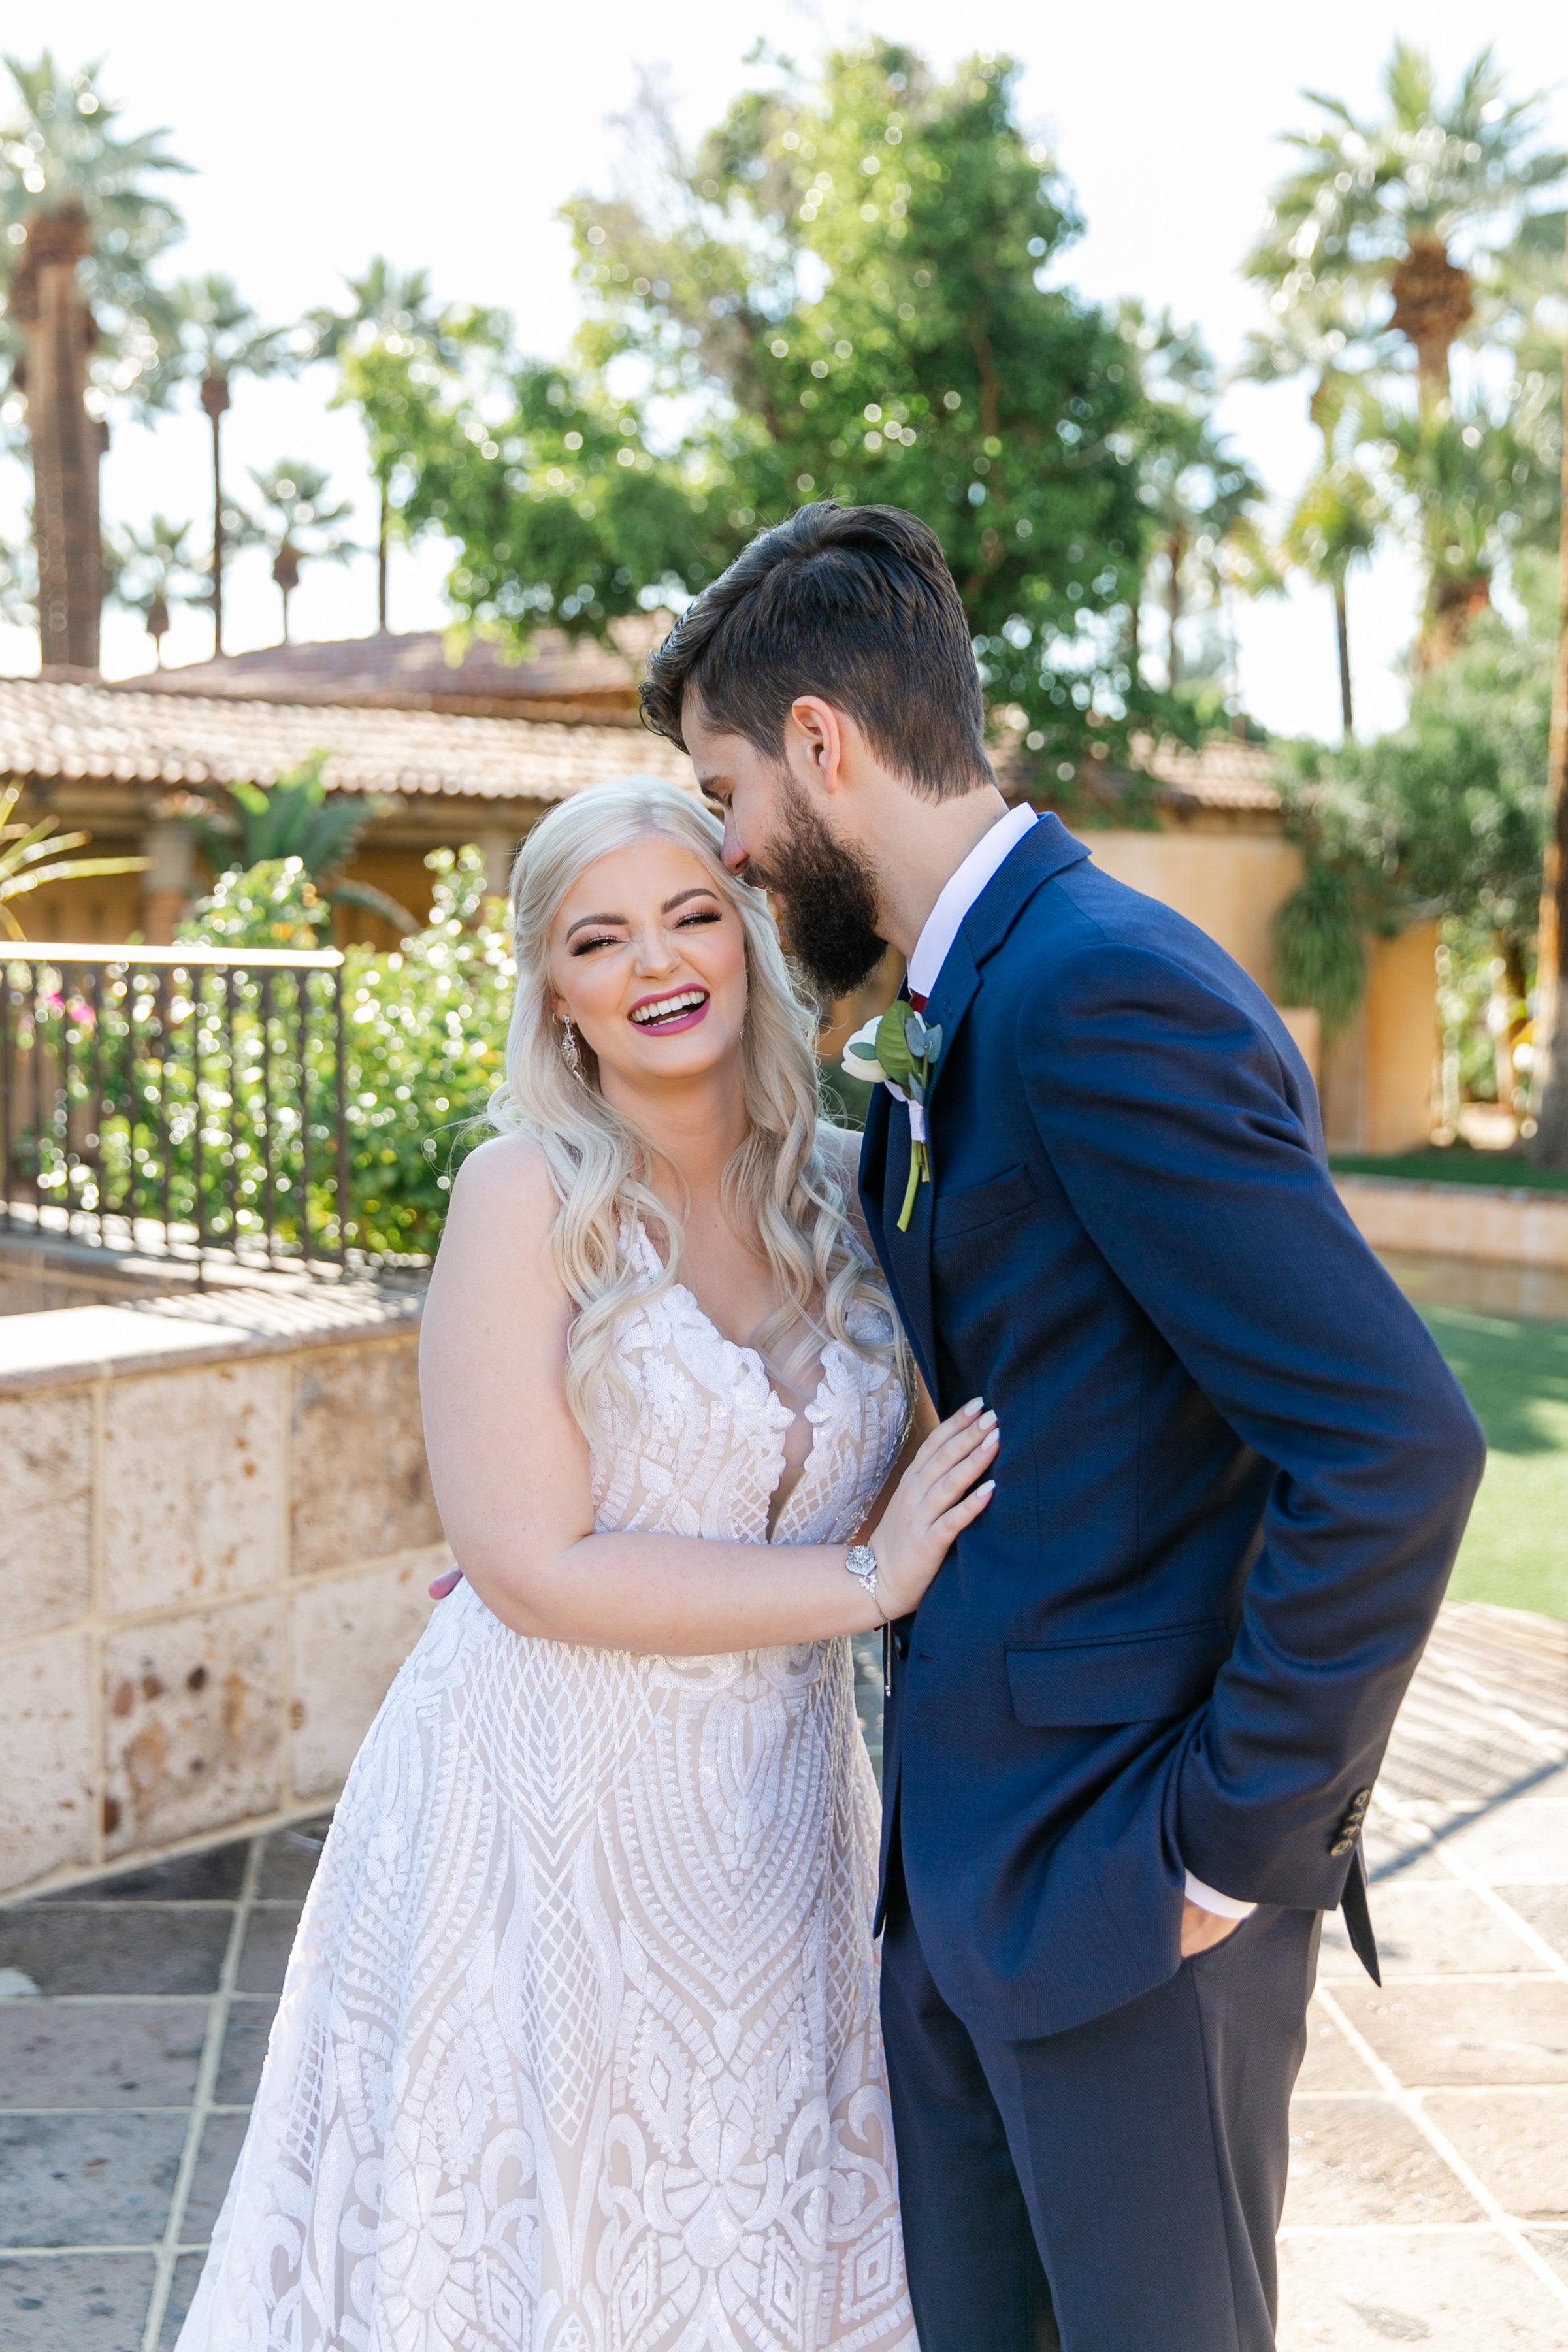 Karlie Colleen Photography - The Royal Palms Wedding - Some Like It Classic - Alex & Sam-122